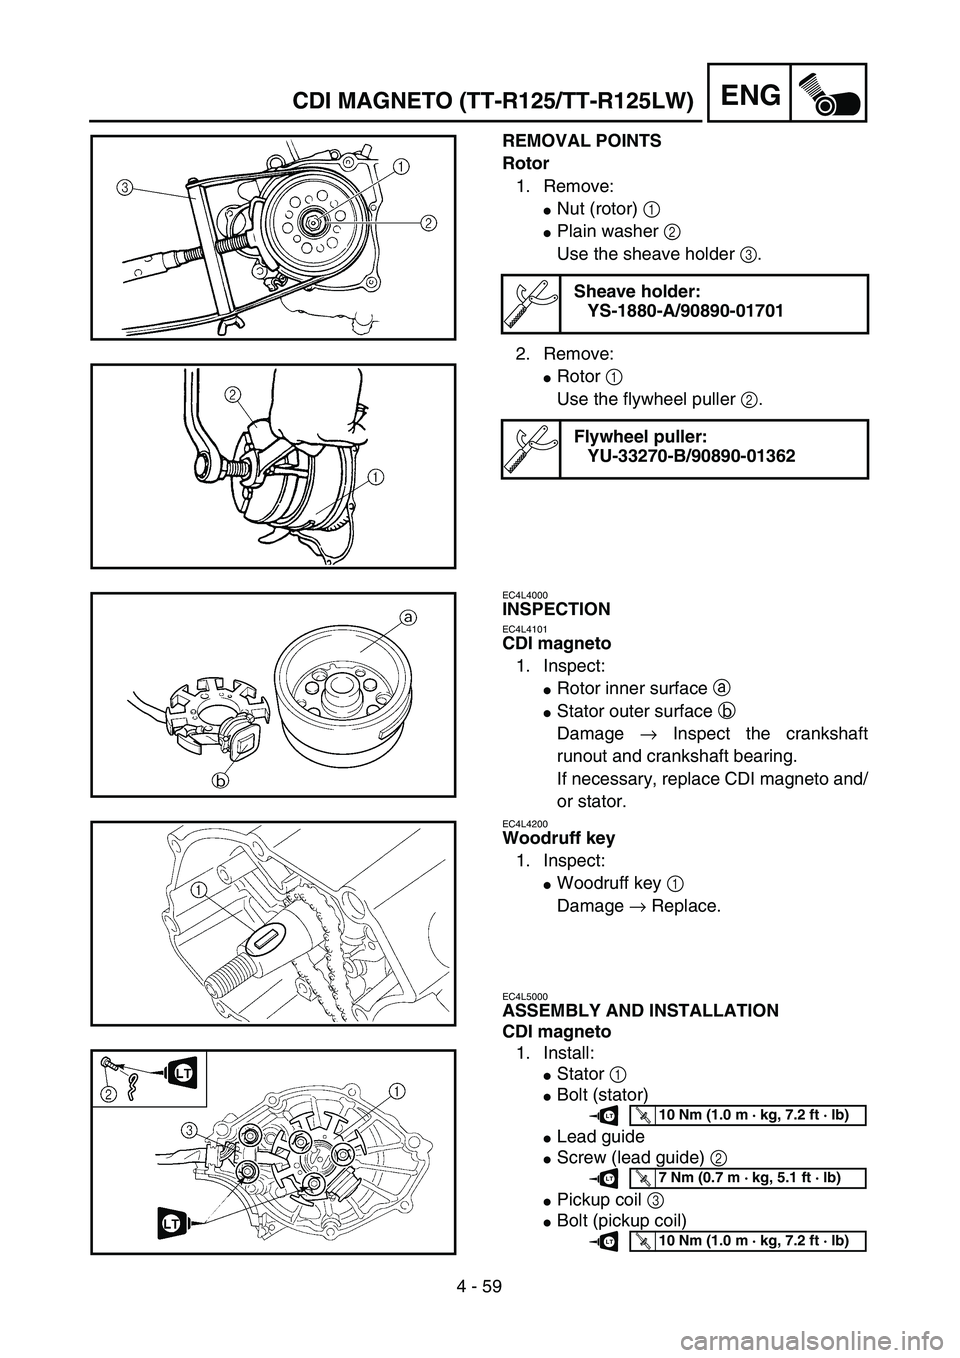 YAMAHA TTR125 2007  Betriebsanleitungen (in German) 4 - 59
ENG
REMOVAL POINTS
Rotor
1. Remove:
Nut (rotor) 1 
Plain washer 2 
Use the sheave holder 3.
2. Remove:
Rotor 1 
Use the flywheel puller 2.
Sheave holder:
YS-1880-A/90890-01701
Flywheel pulle